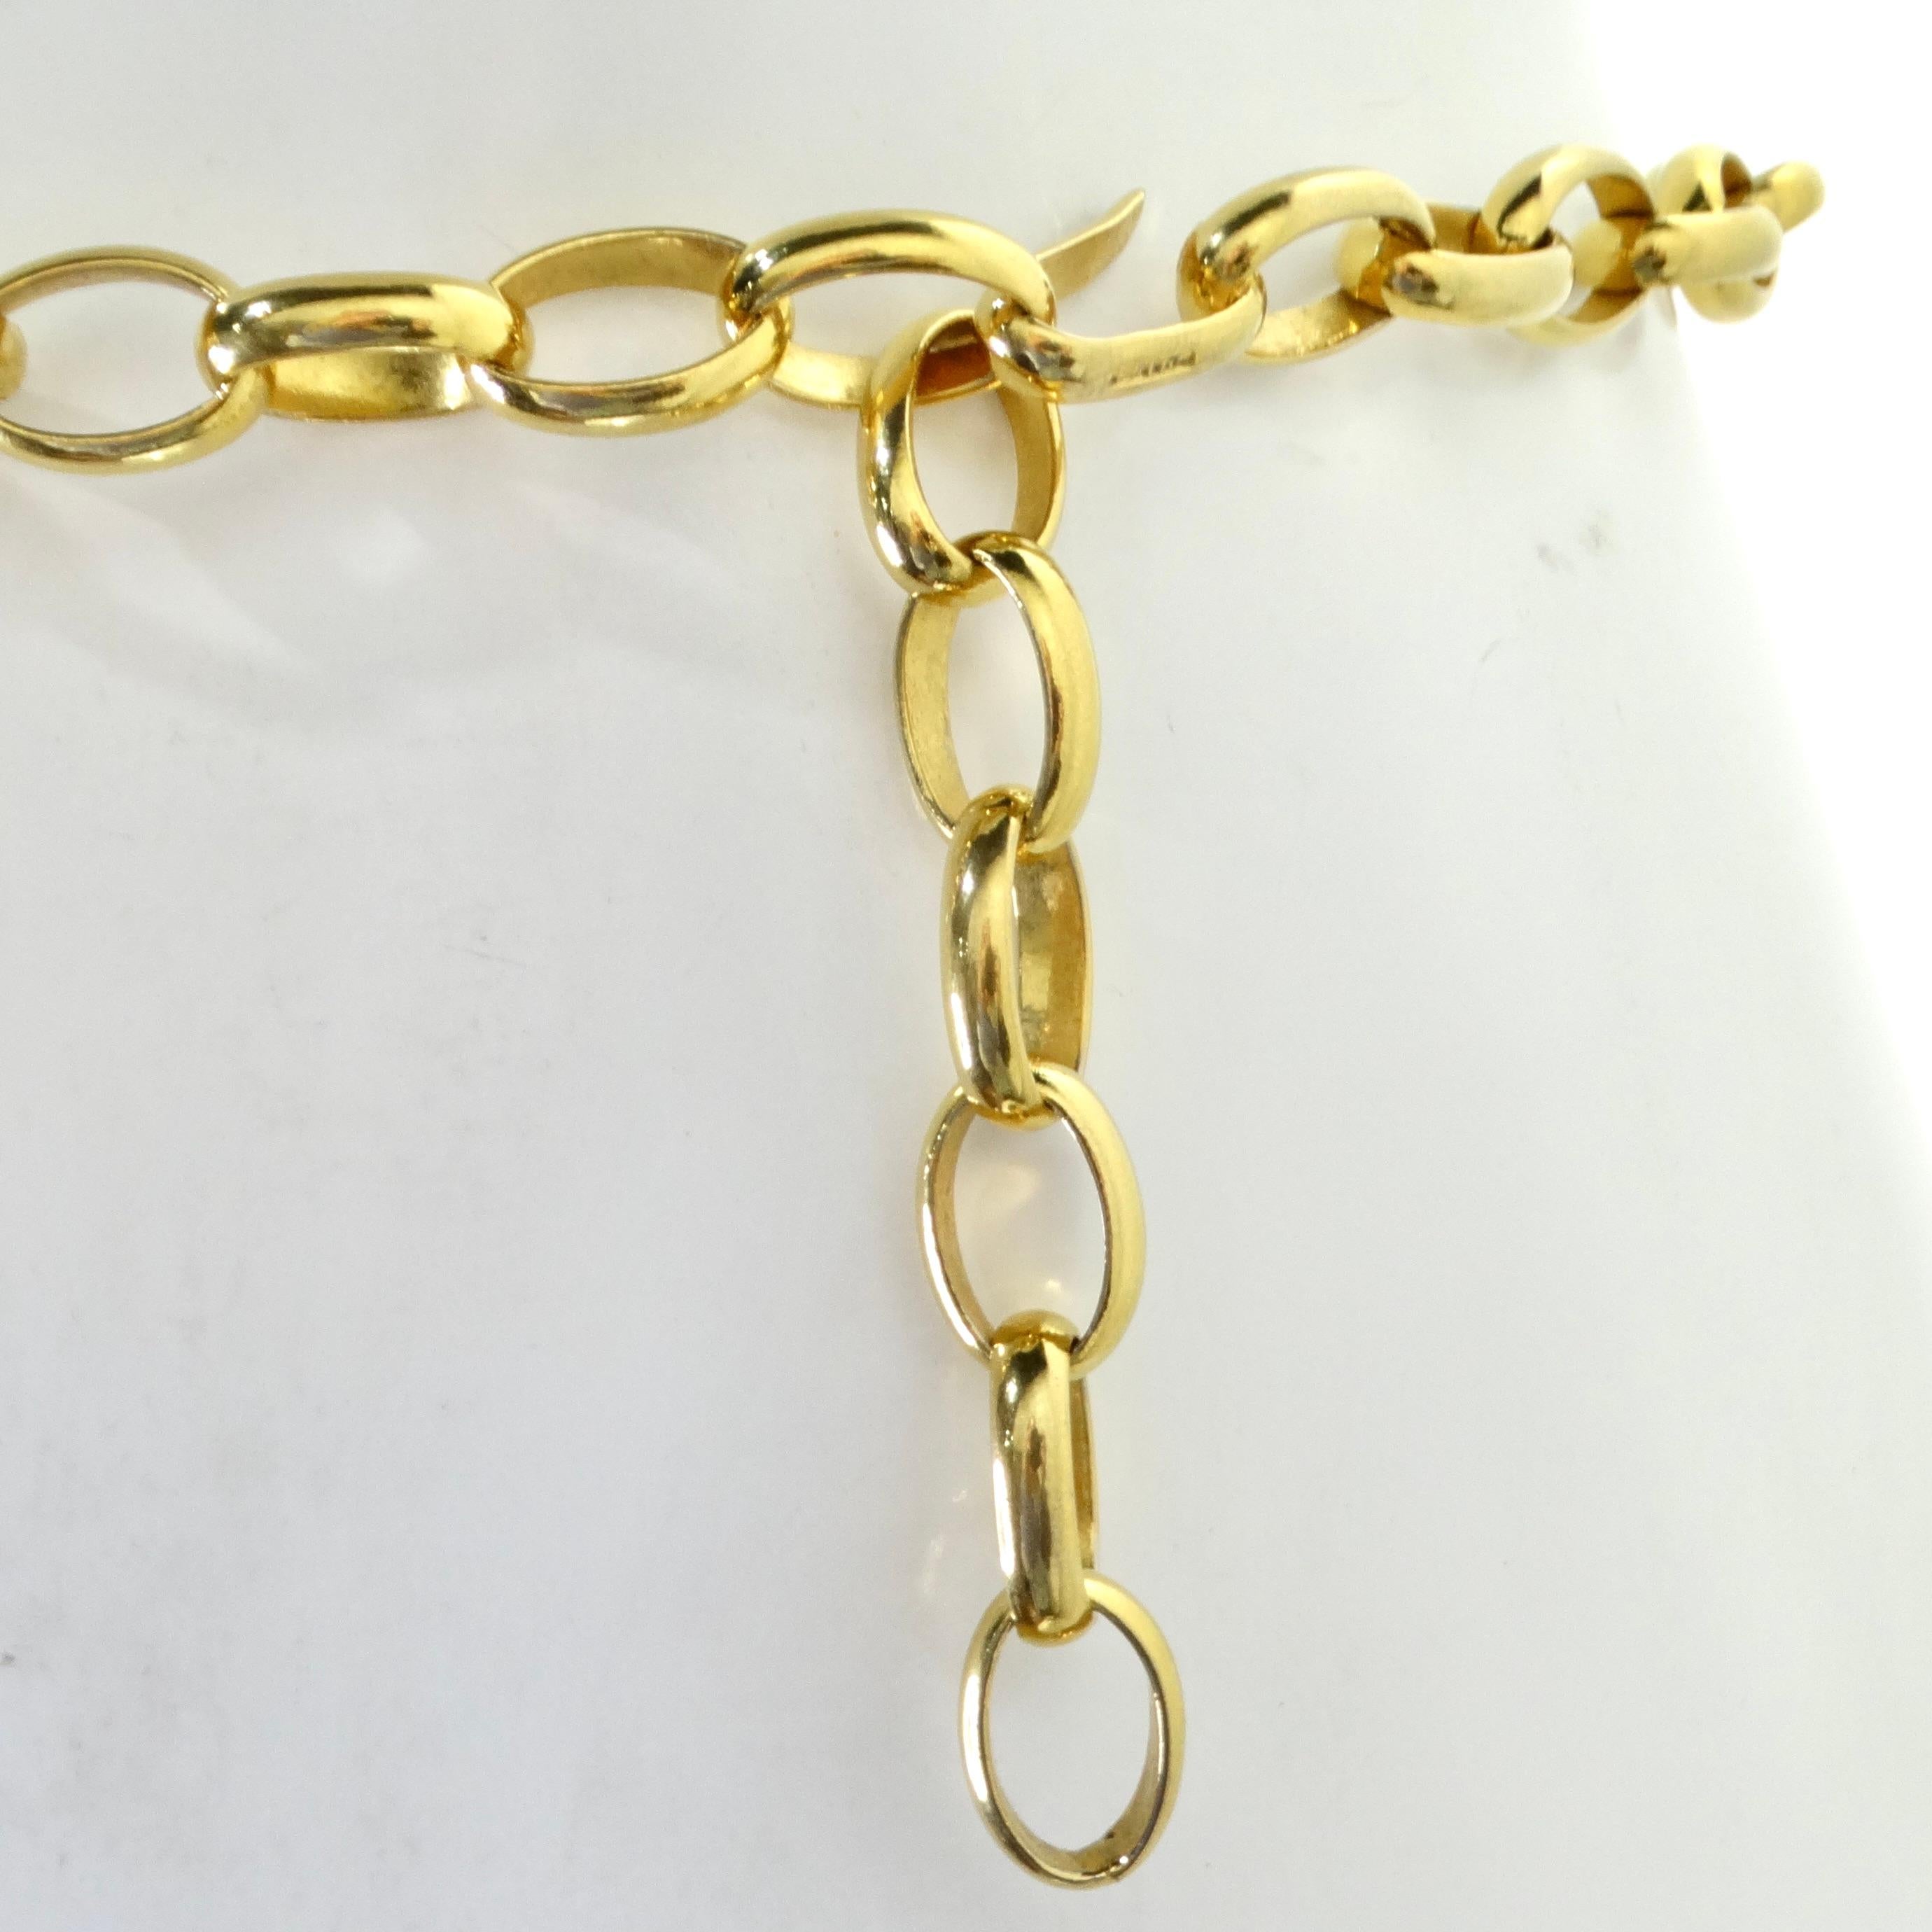 Chanel 1970s Gold Tone Oversize Pendant Necklace For Sale 7